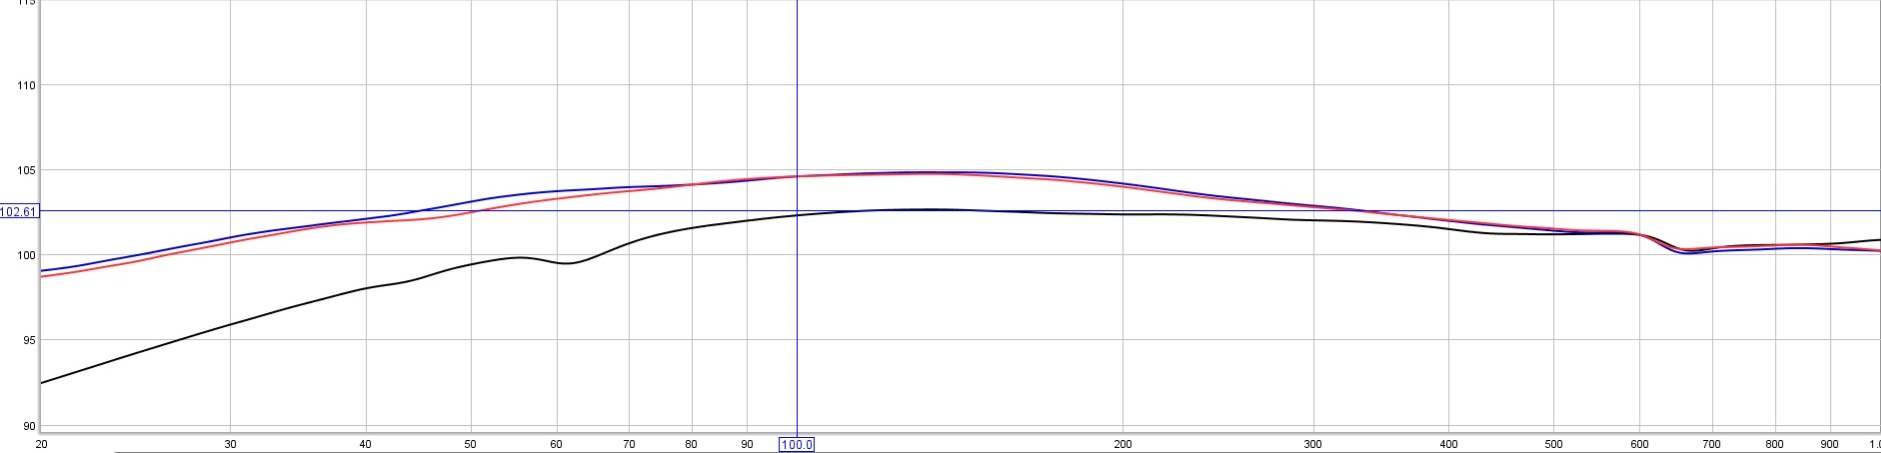 Frequency response consistency on open back headphones - male vs female subject